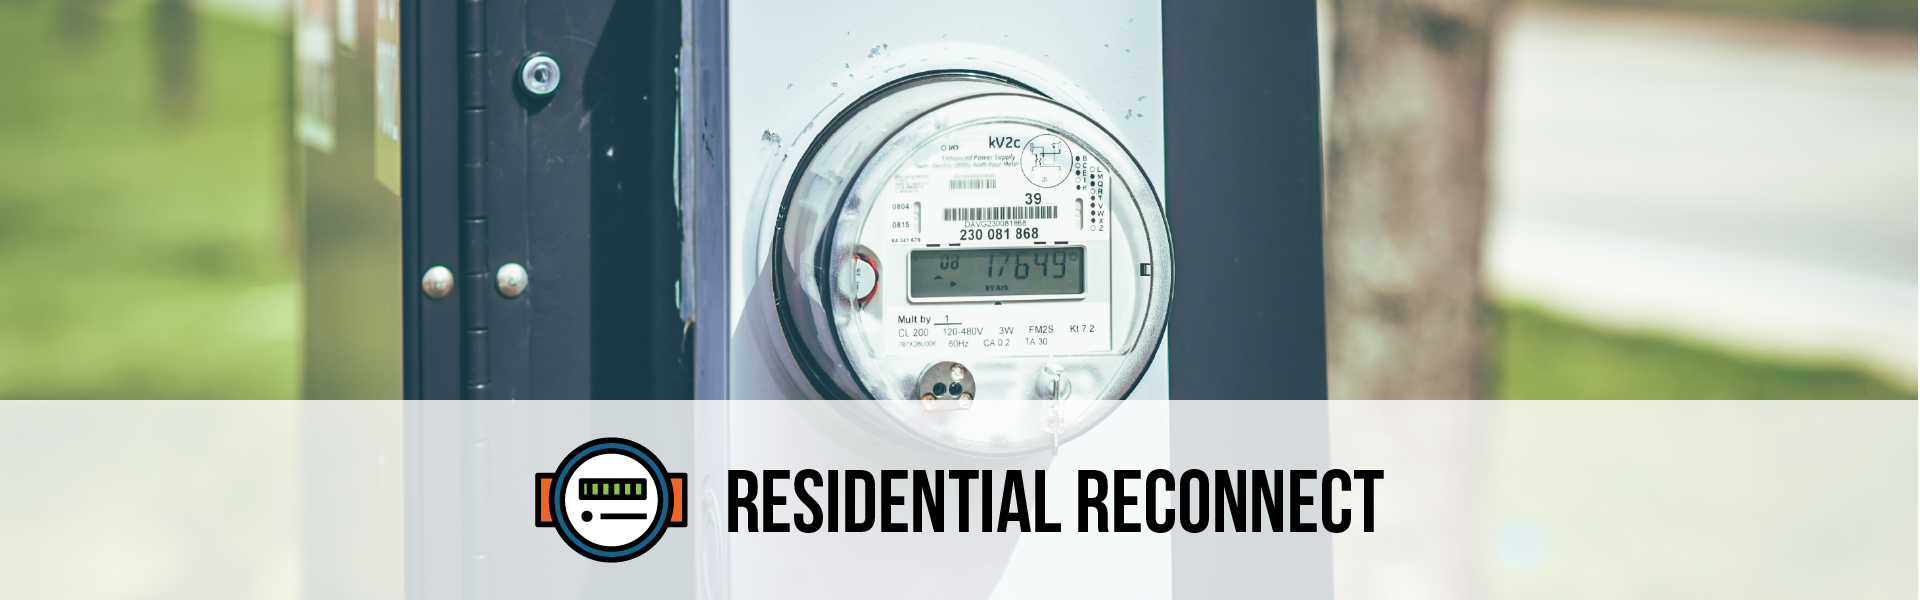 residential reconnect graphic